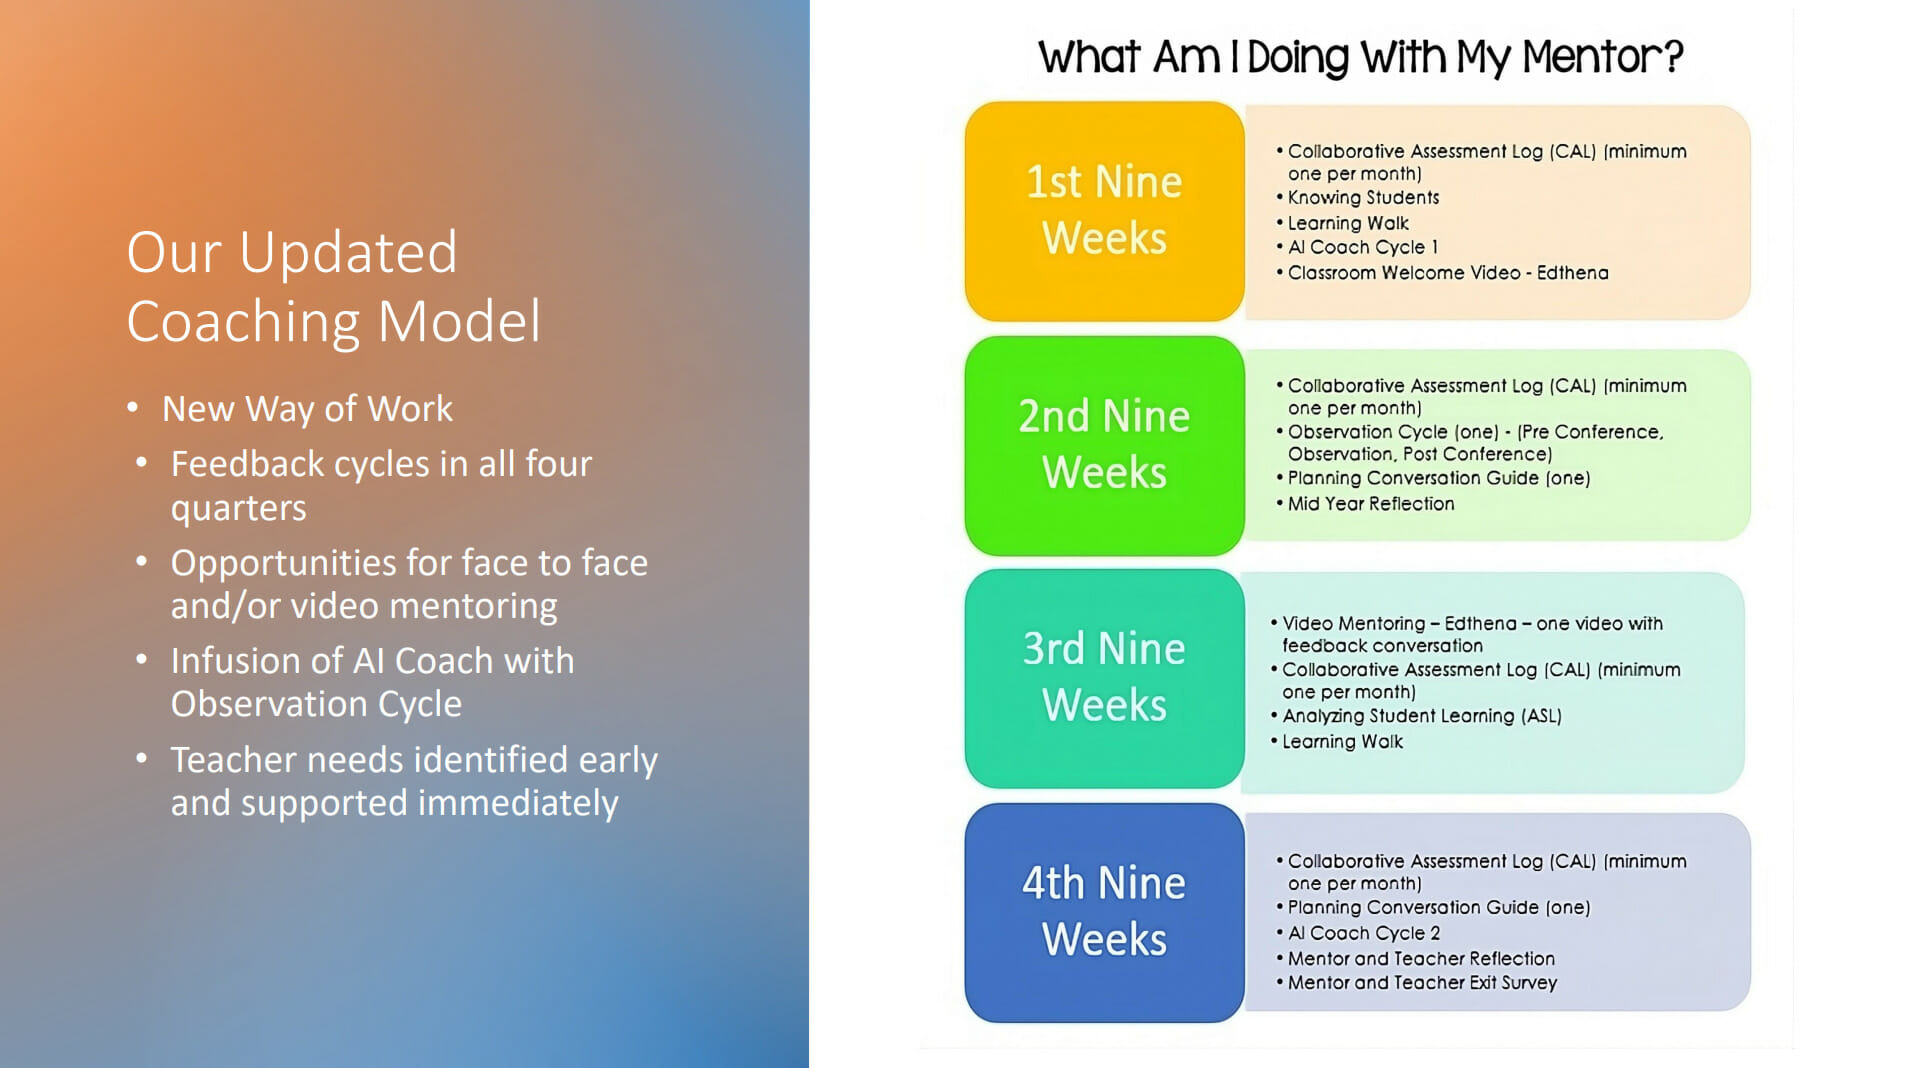 Updated coaching model including instructional coaching cycles in every quarter